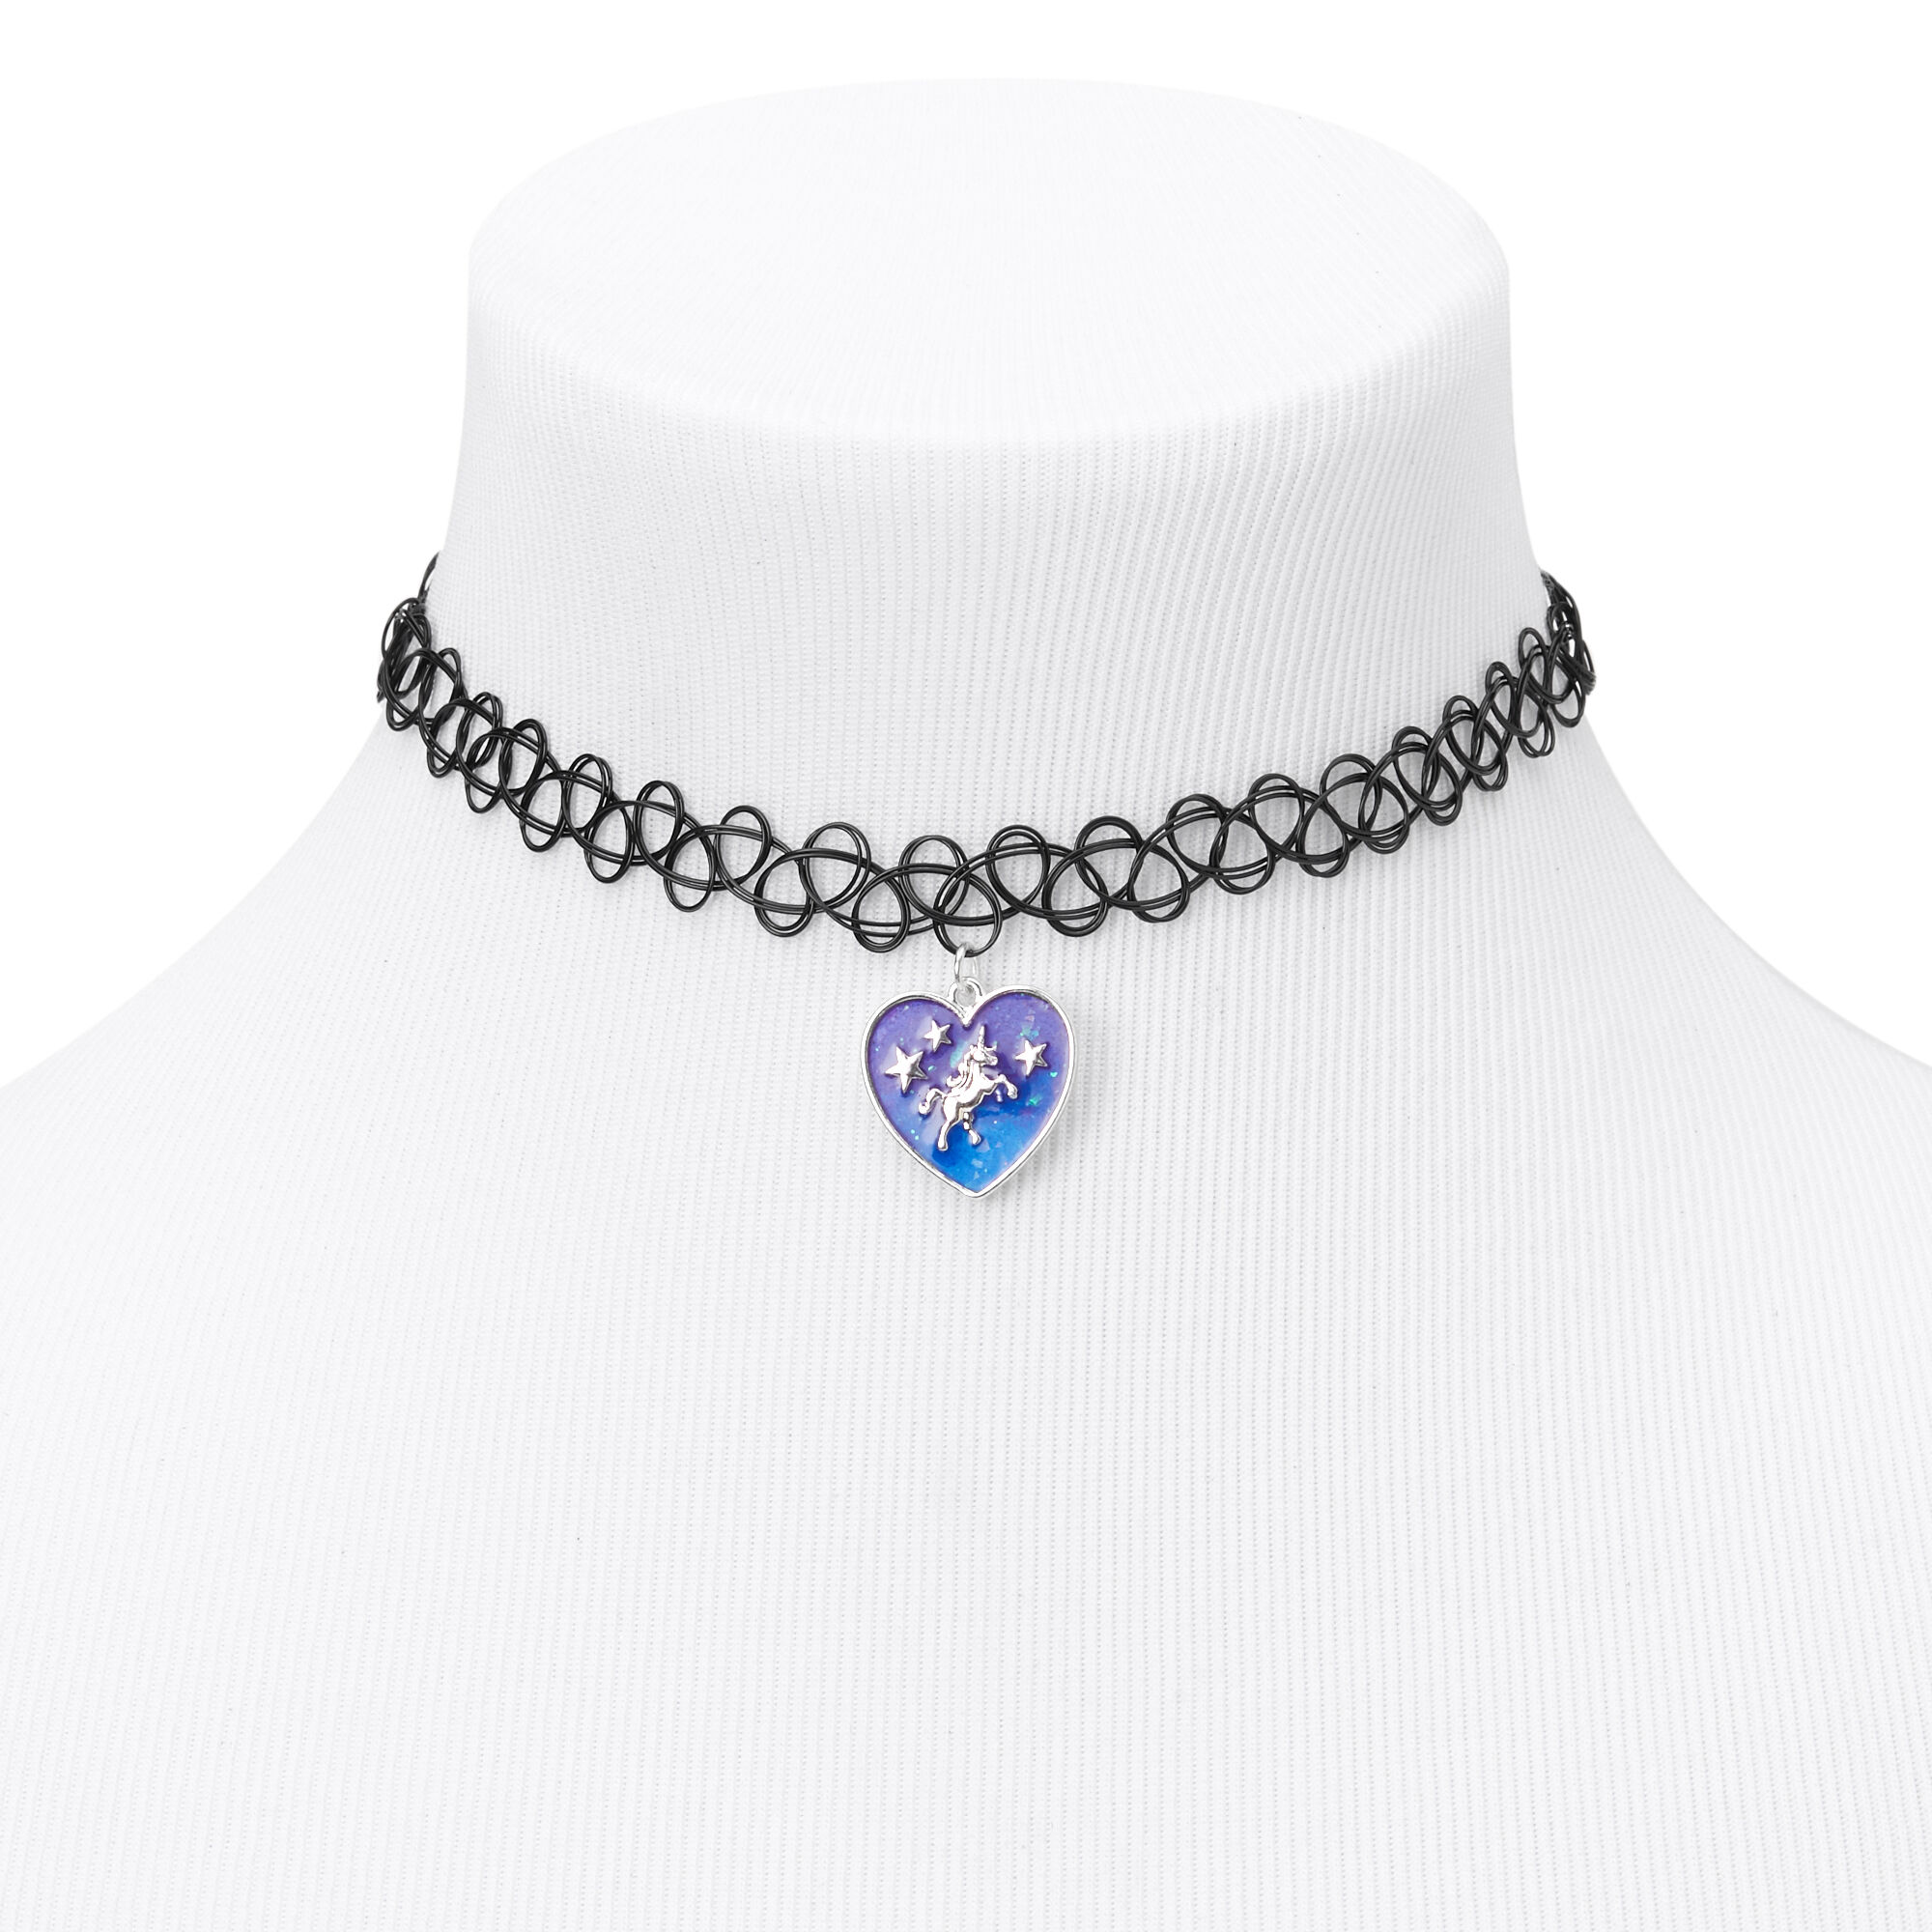 View Claires Unicorn Heart Tattoo Choker Necklace Black information